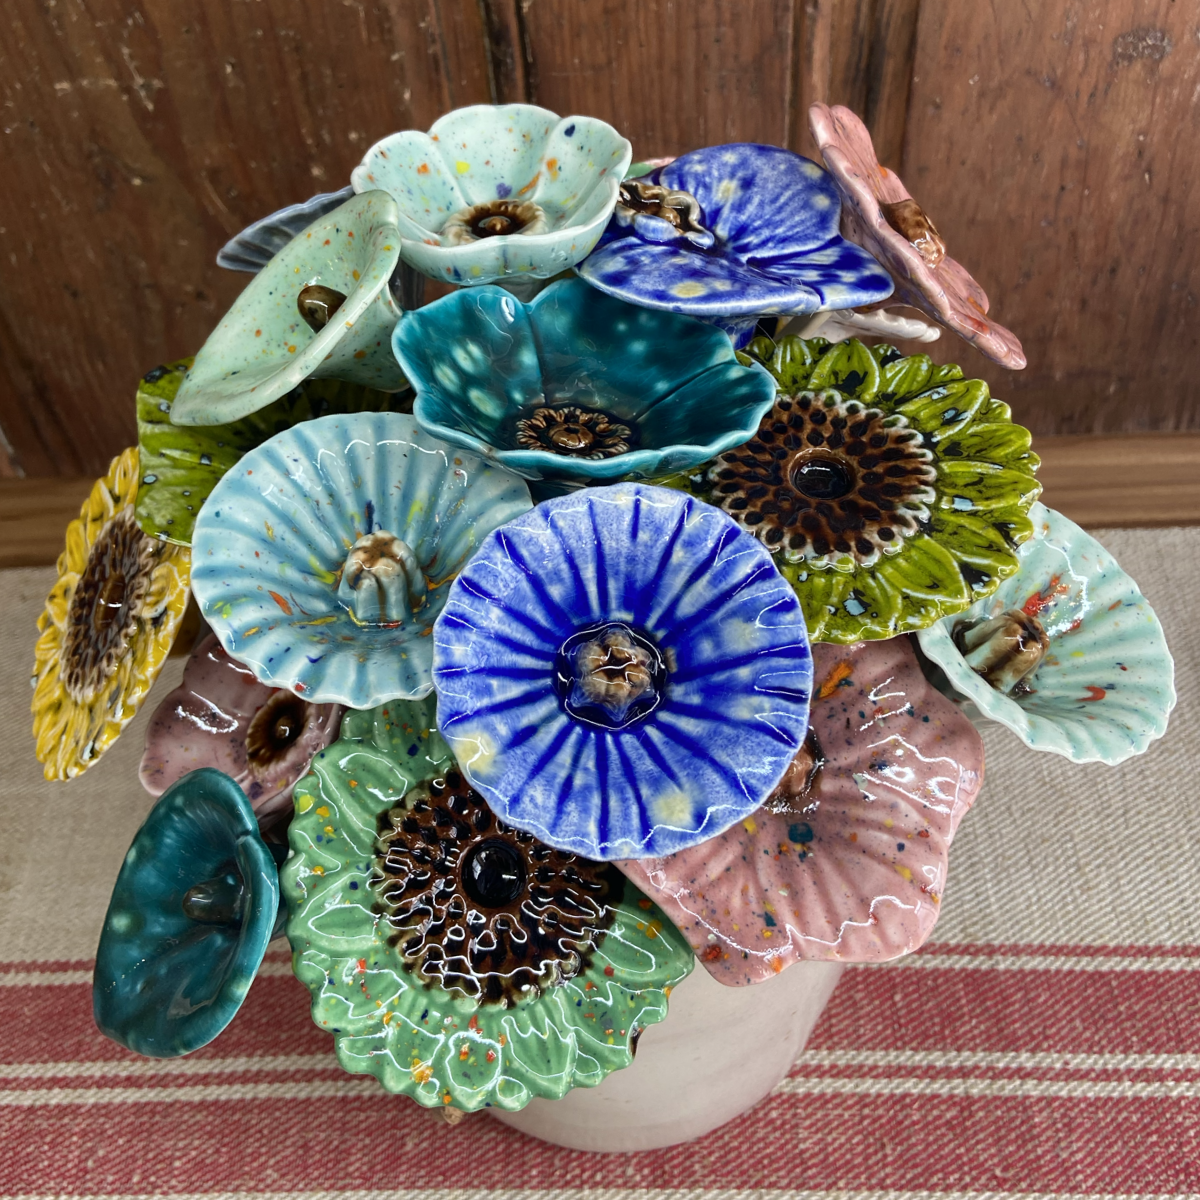 CERAMIC FLOWERS by Suuuper